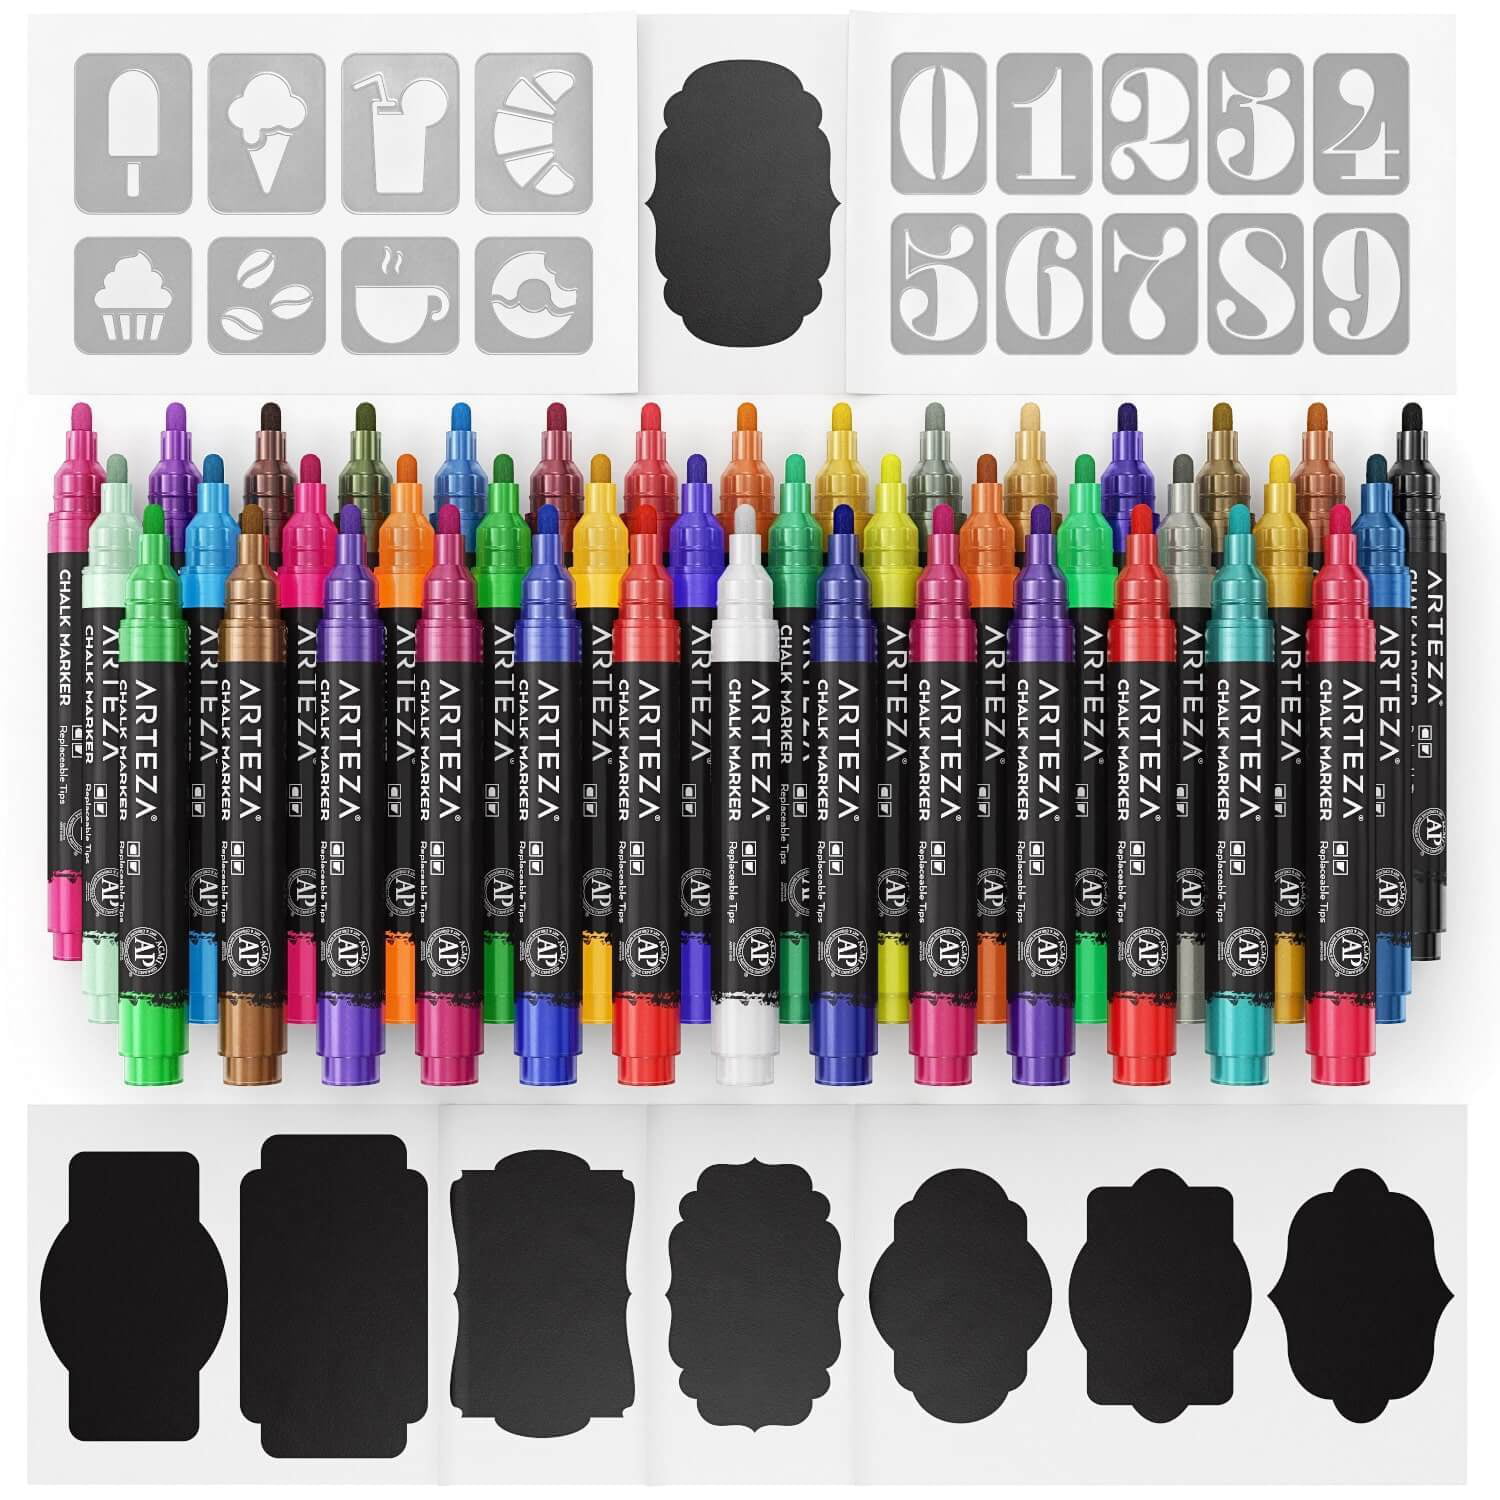 Arteza Fabric Markers, Black - 6 Pack : Target